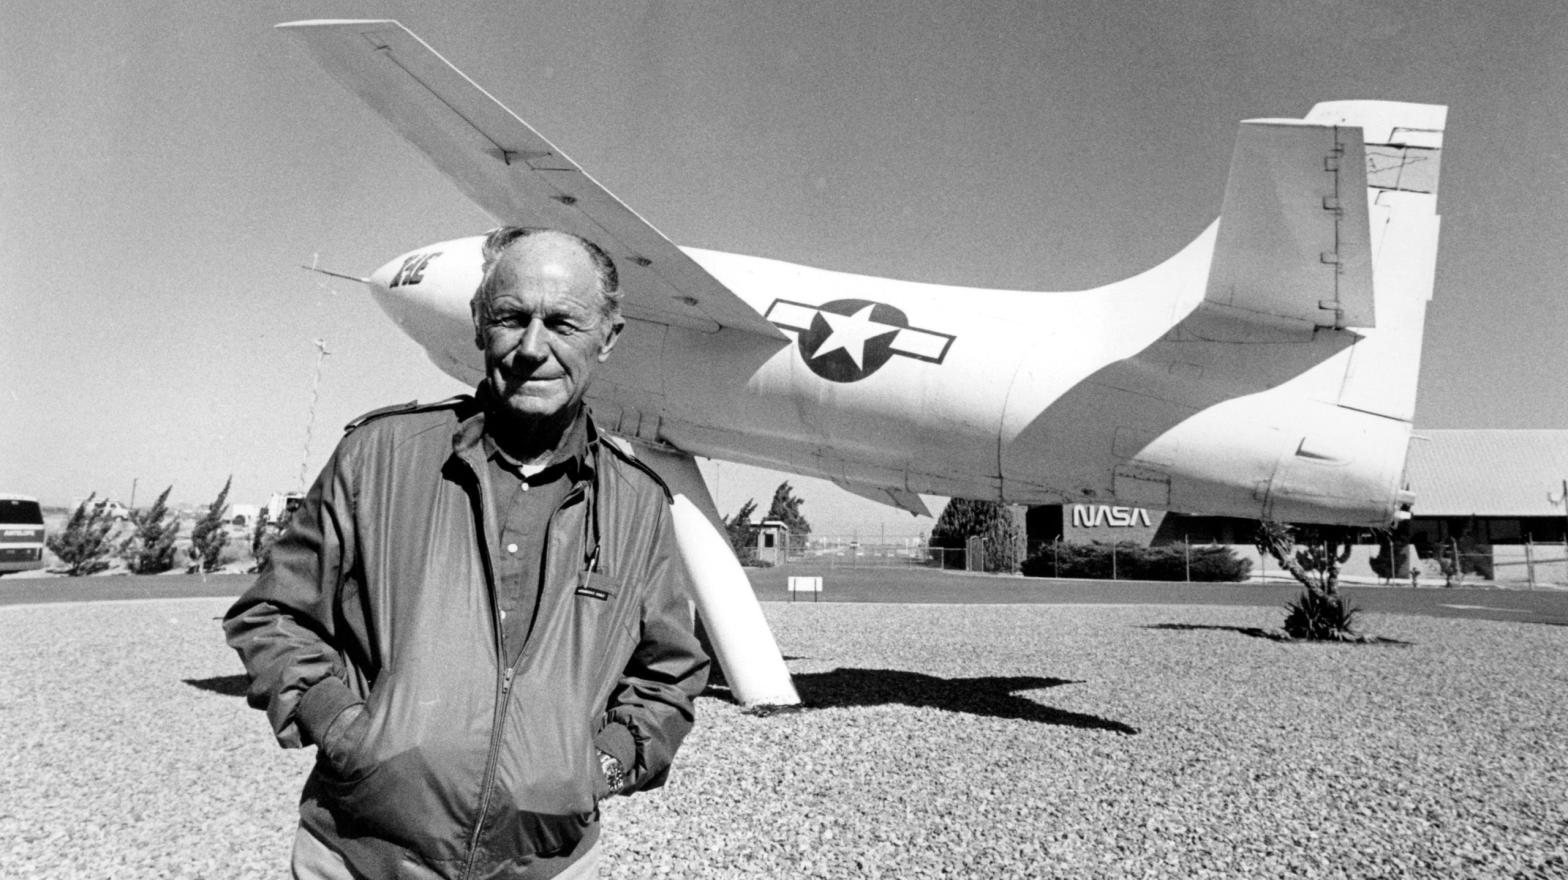 In this Sept. 4, 1985 file photo, Chuck Yeager, the first pilot to  break the sound barrier in 1947, poses at Edwards Air Force Base,  Calif., in front of the rocket-powered Bell X-IE plane that he flew.  Yeager died Monday, Dec. 7, 2020, at age 97. (Photo: Douglas C. Pizac, AP)